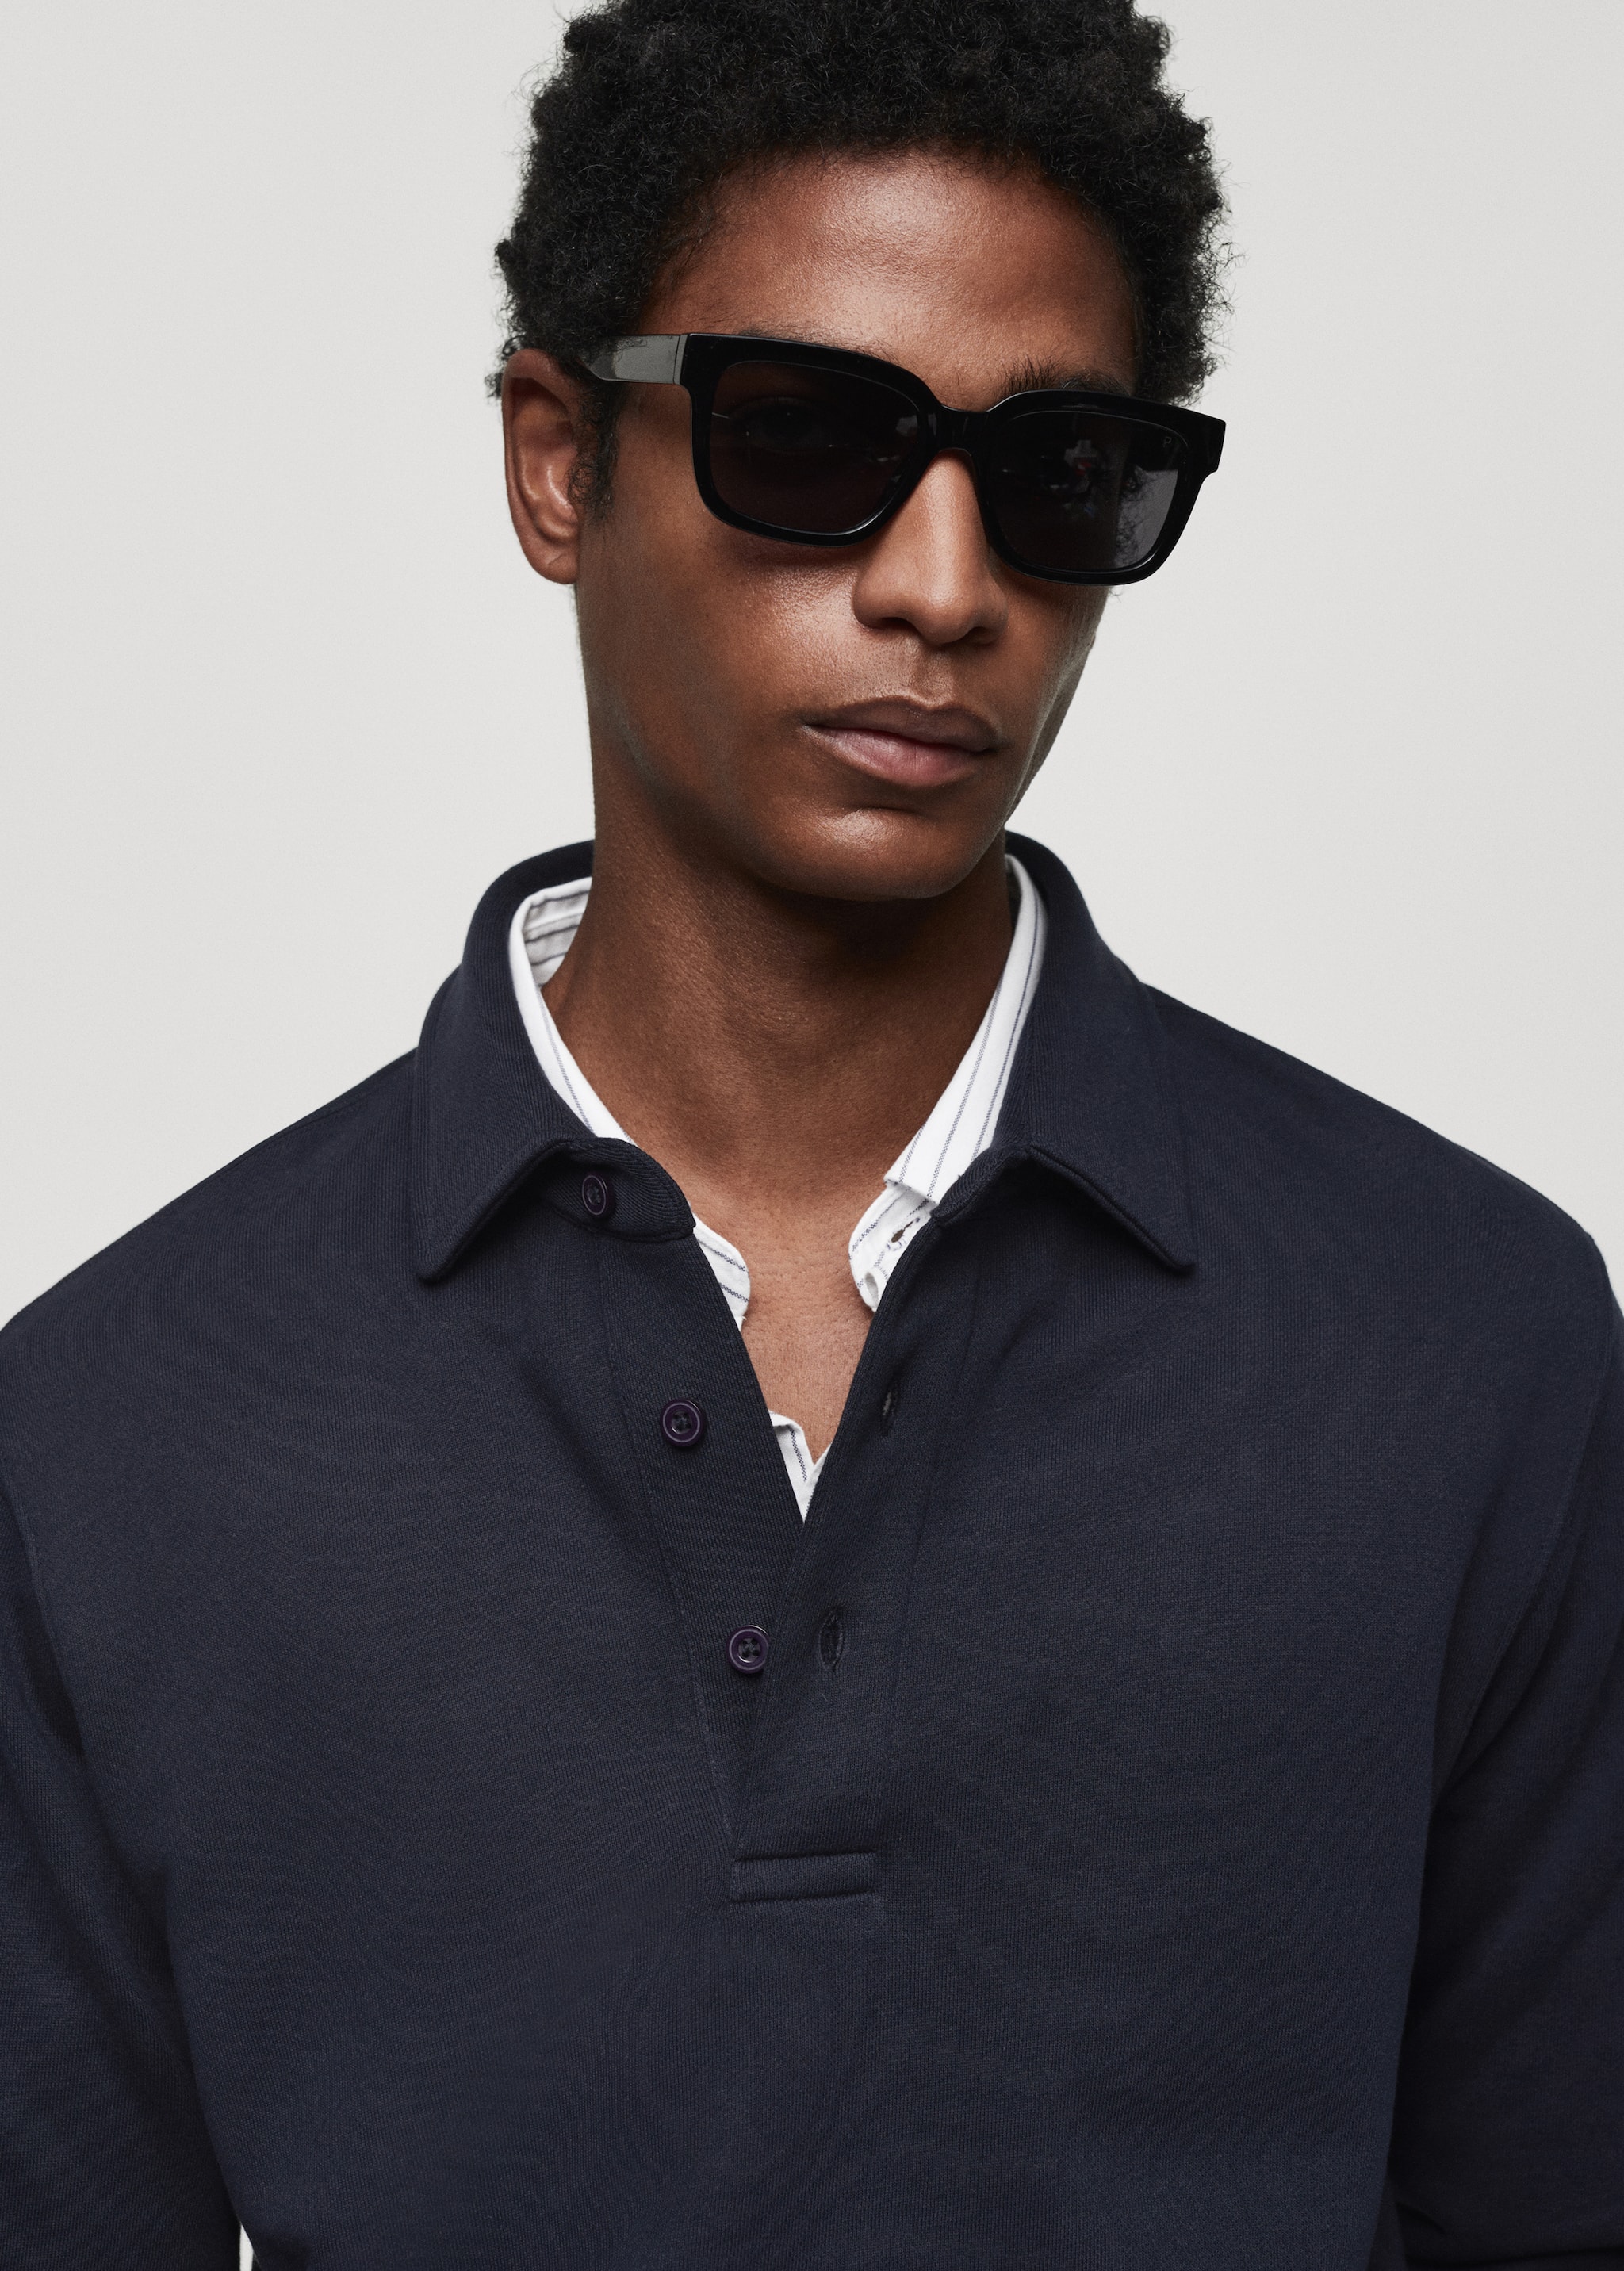 Cotton polo sweatshirt - Details of the article 1